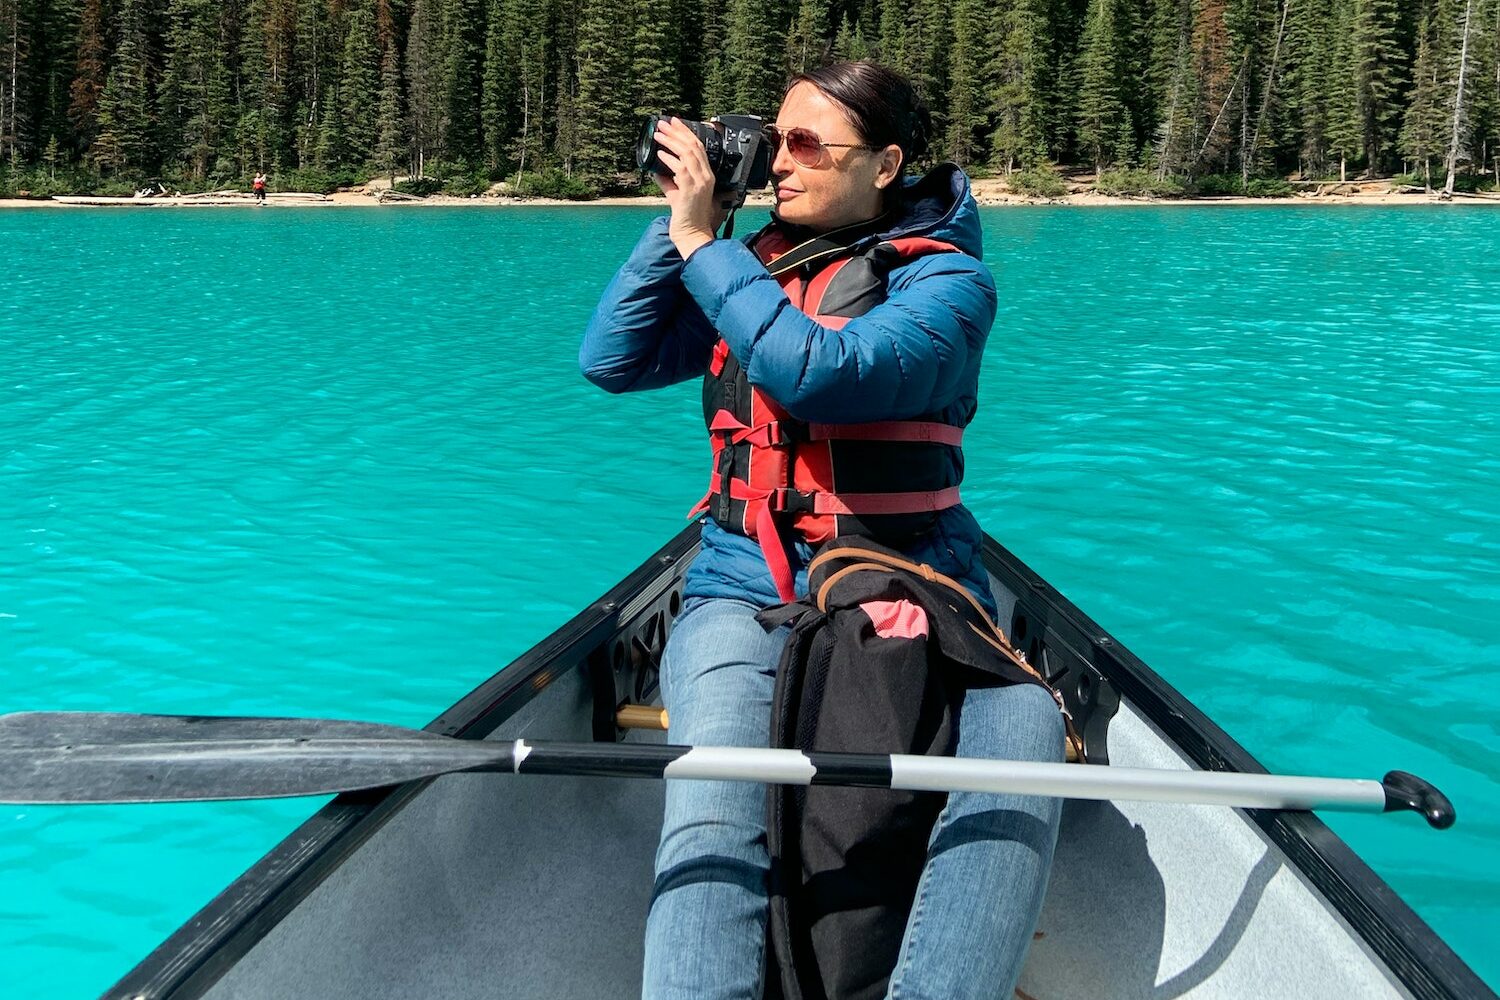 Middle aged woman in canoe on turquoise blue lake taking photos with digital camera